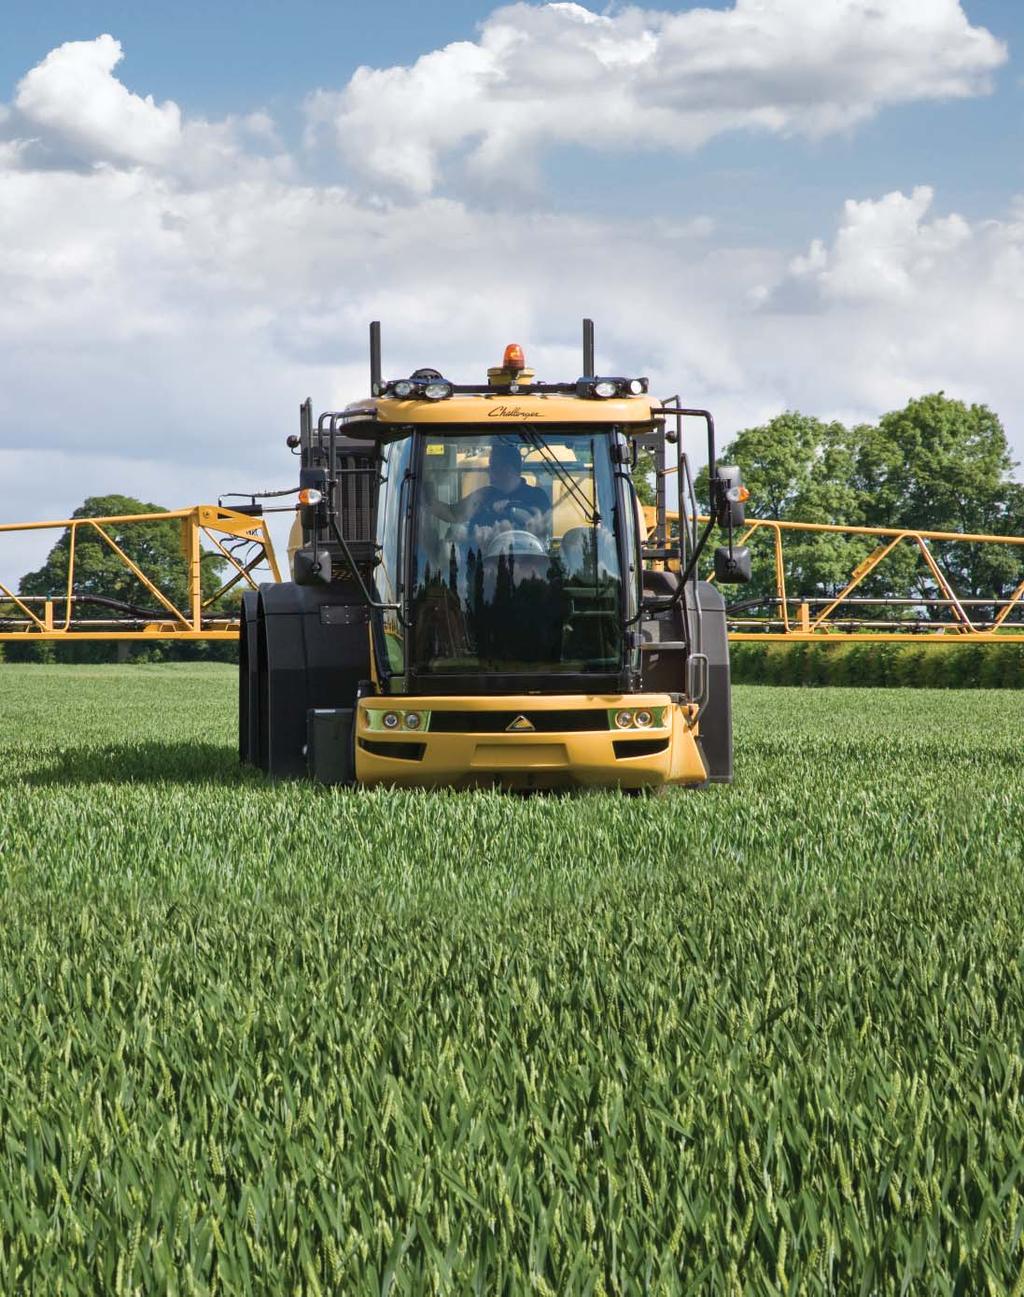 Innovative Opti-Ride wheel suspension and variable working Dual-height The performance of RoGator 600 Series sprayers receives a huge boost from the totally new independent, hydro-pneumatic